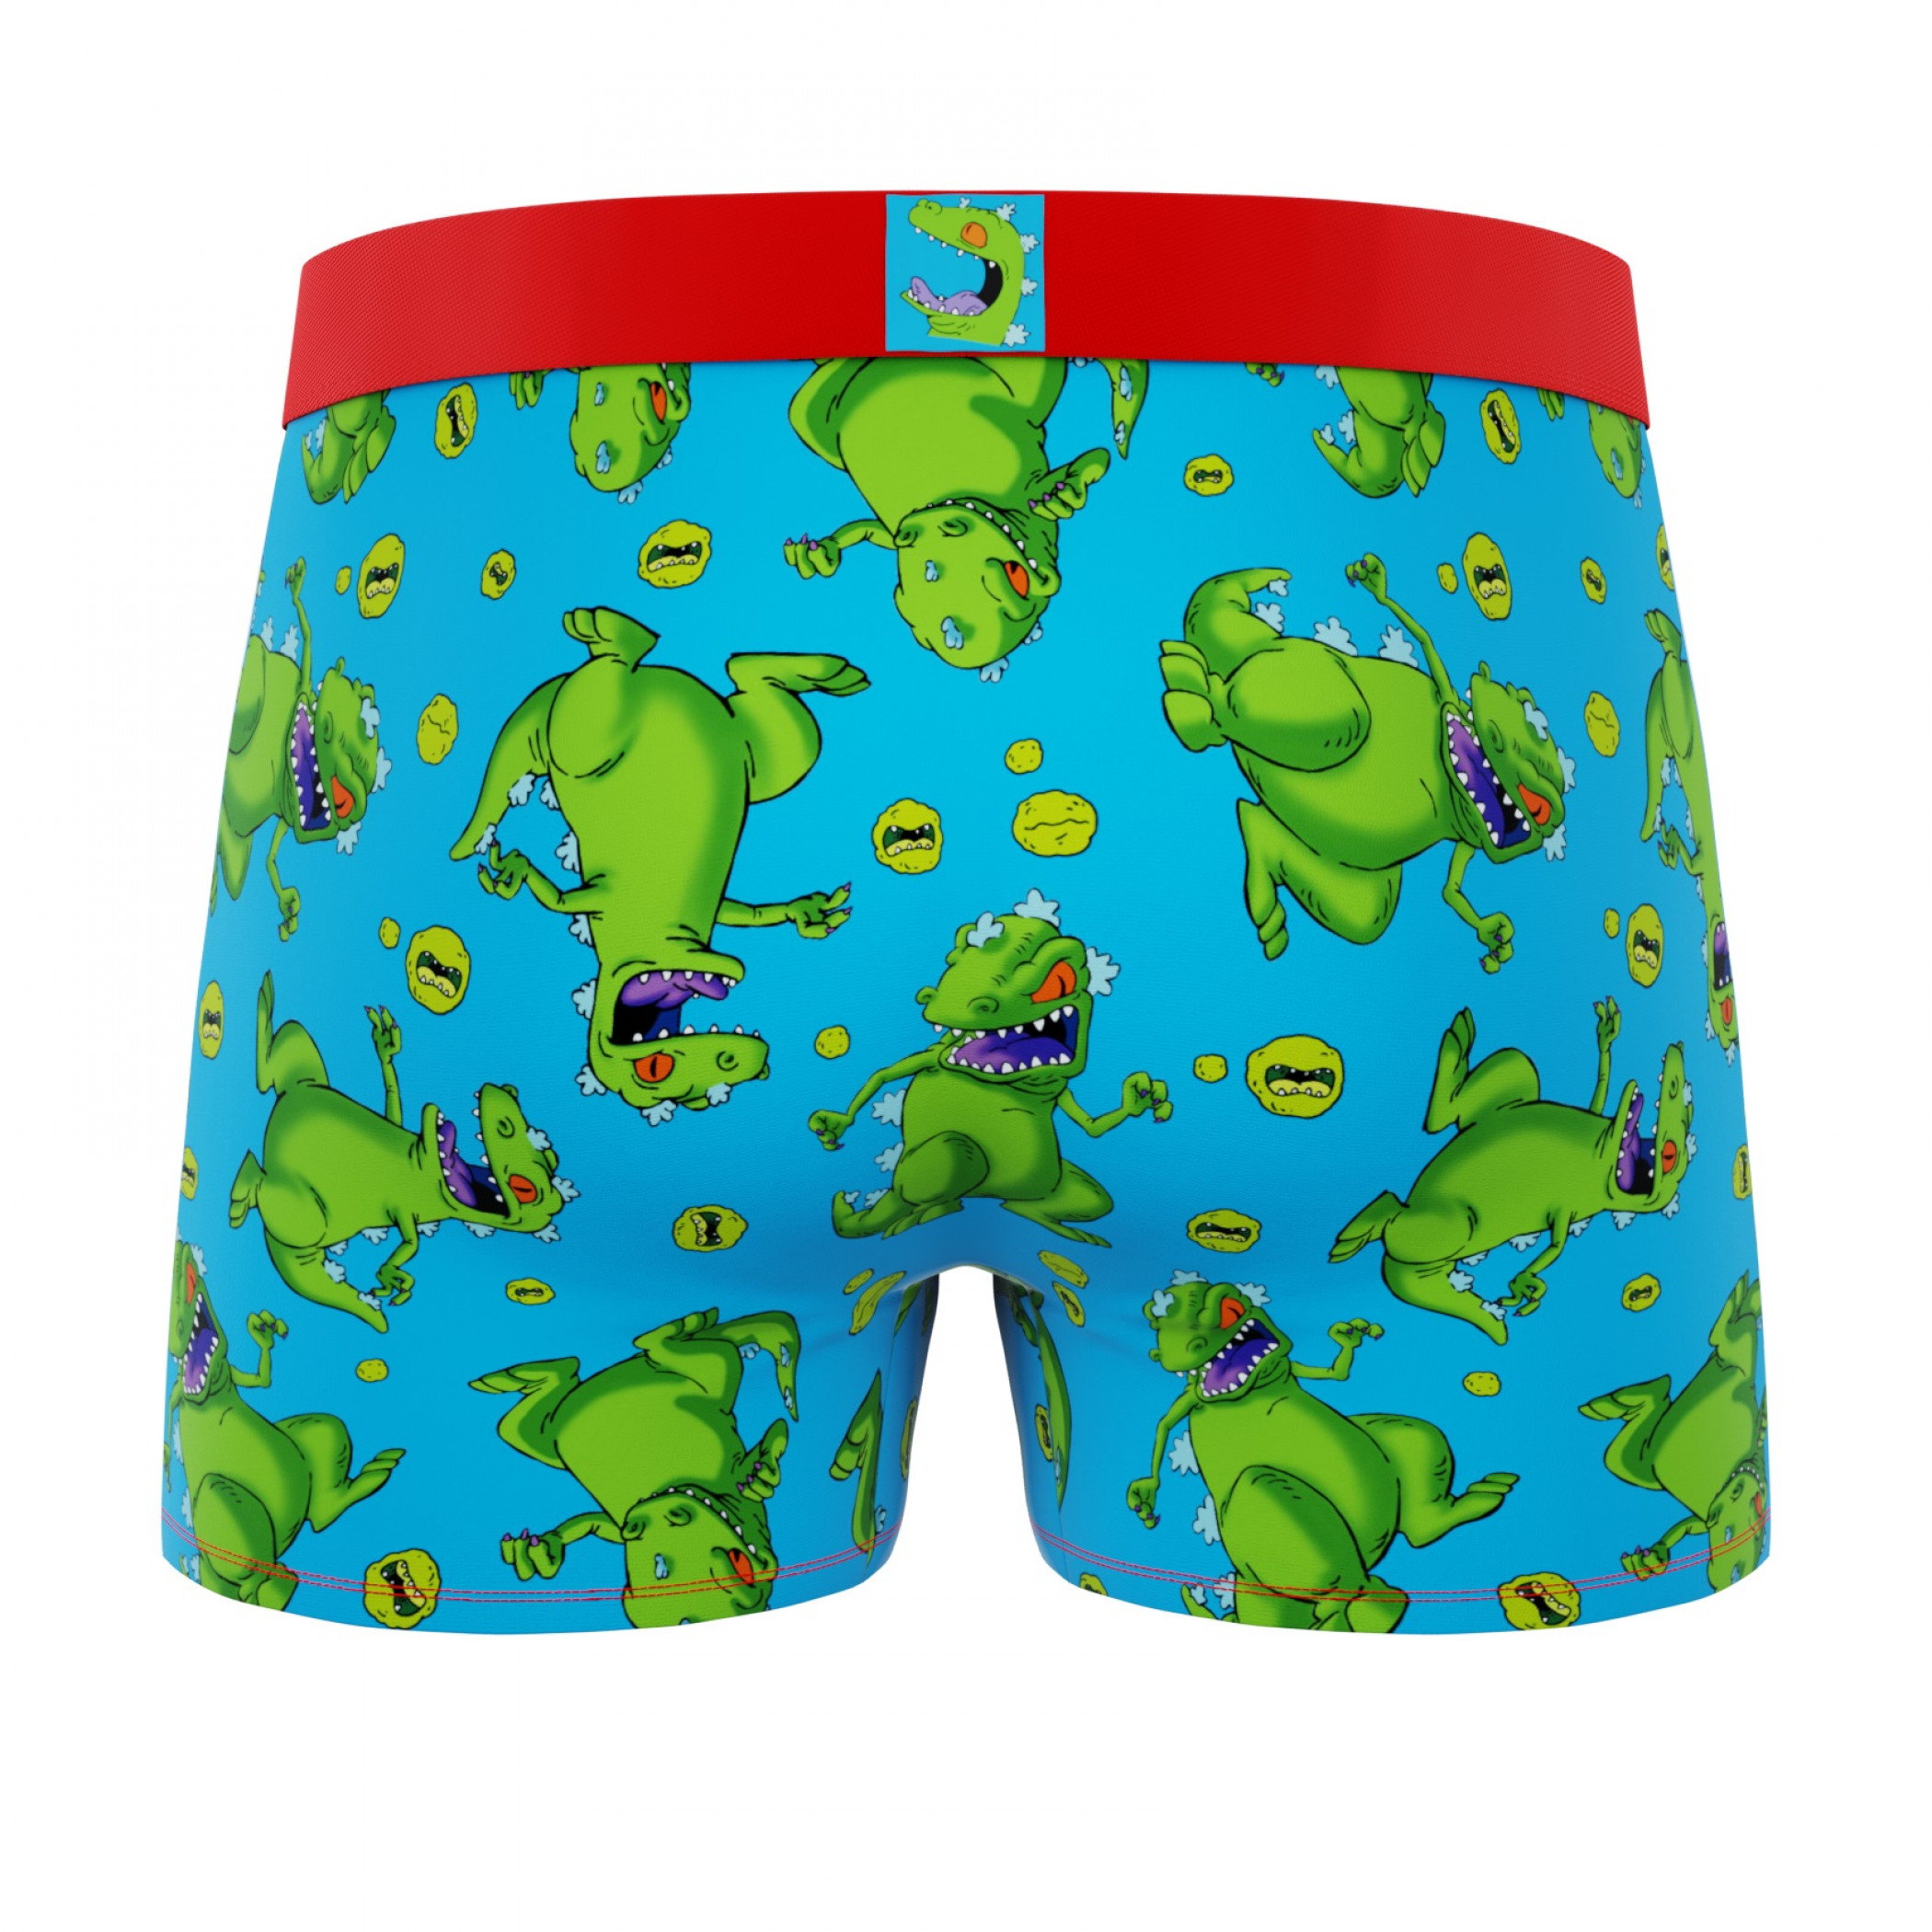 Crazy Boxers Kellogg's Froot Loops Toucan Sam Boxer Brief in Cereal Box